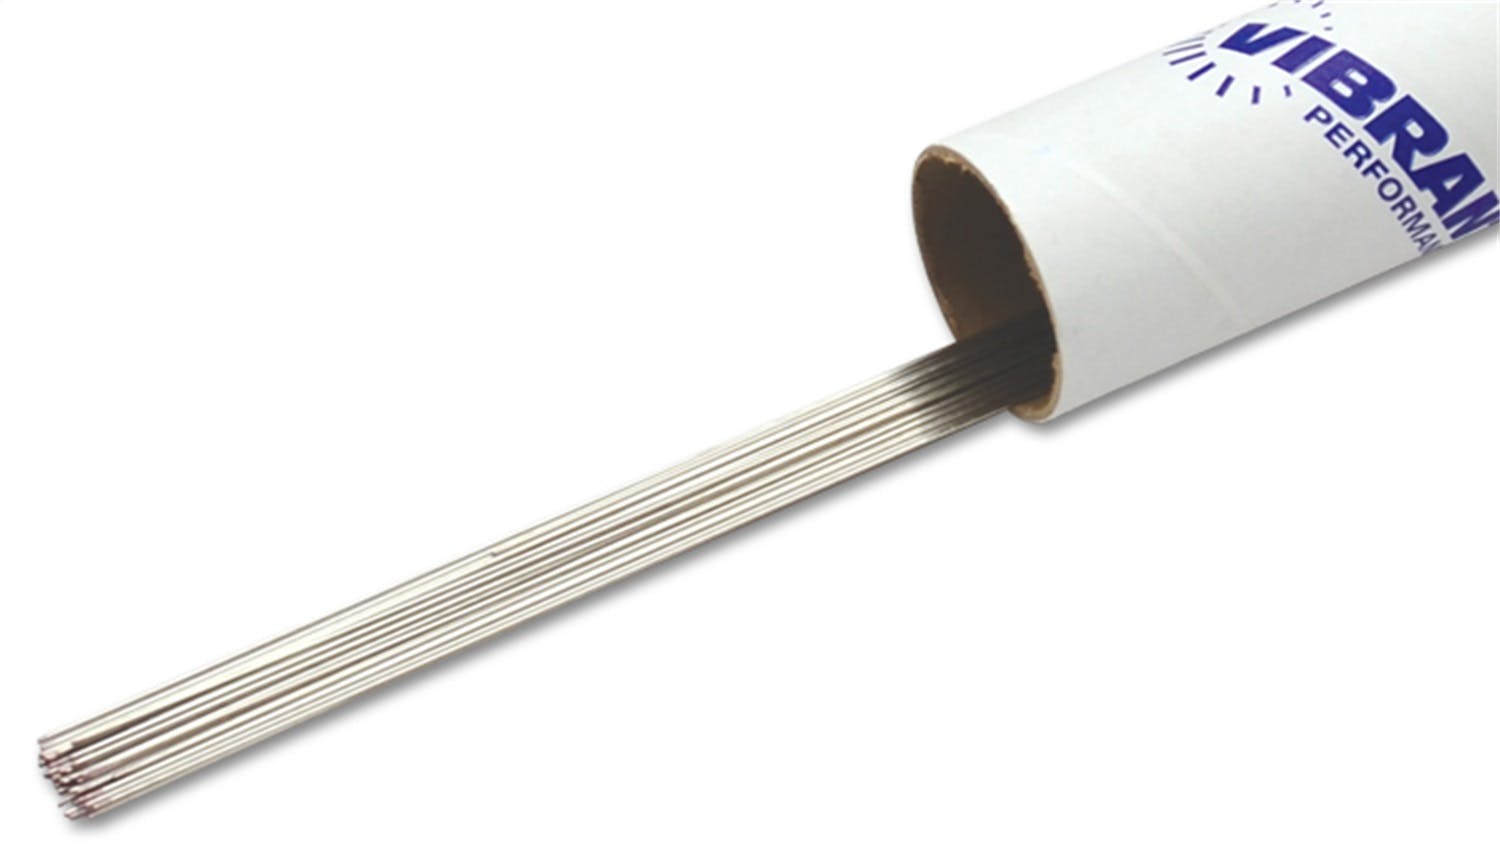 Vibrant Performance 29231 Wire Stainless Steel ER309L - 0.035 inch Thick (0.9mm) - 39.5 inch Long Rod - 1lb box